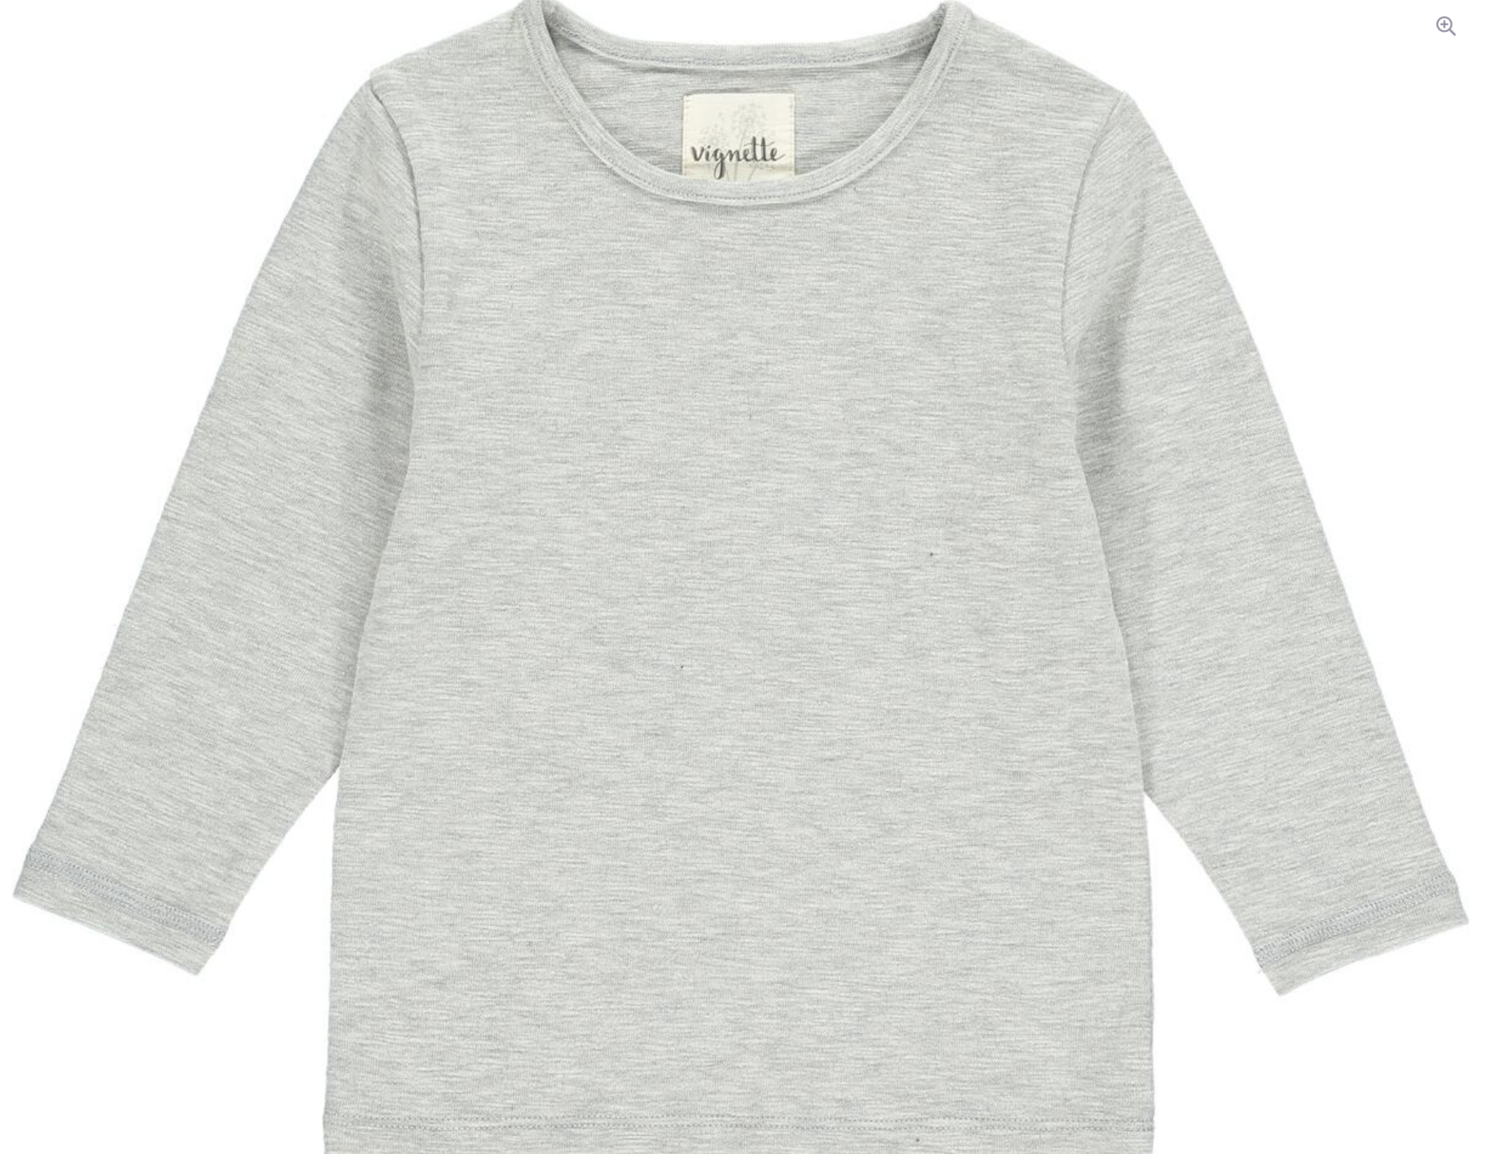 Reese T-shirt in grey